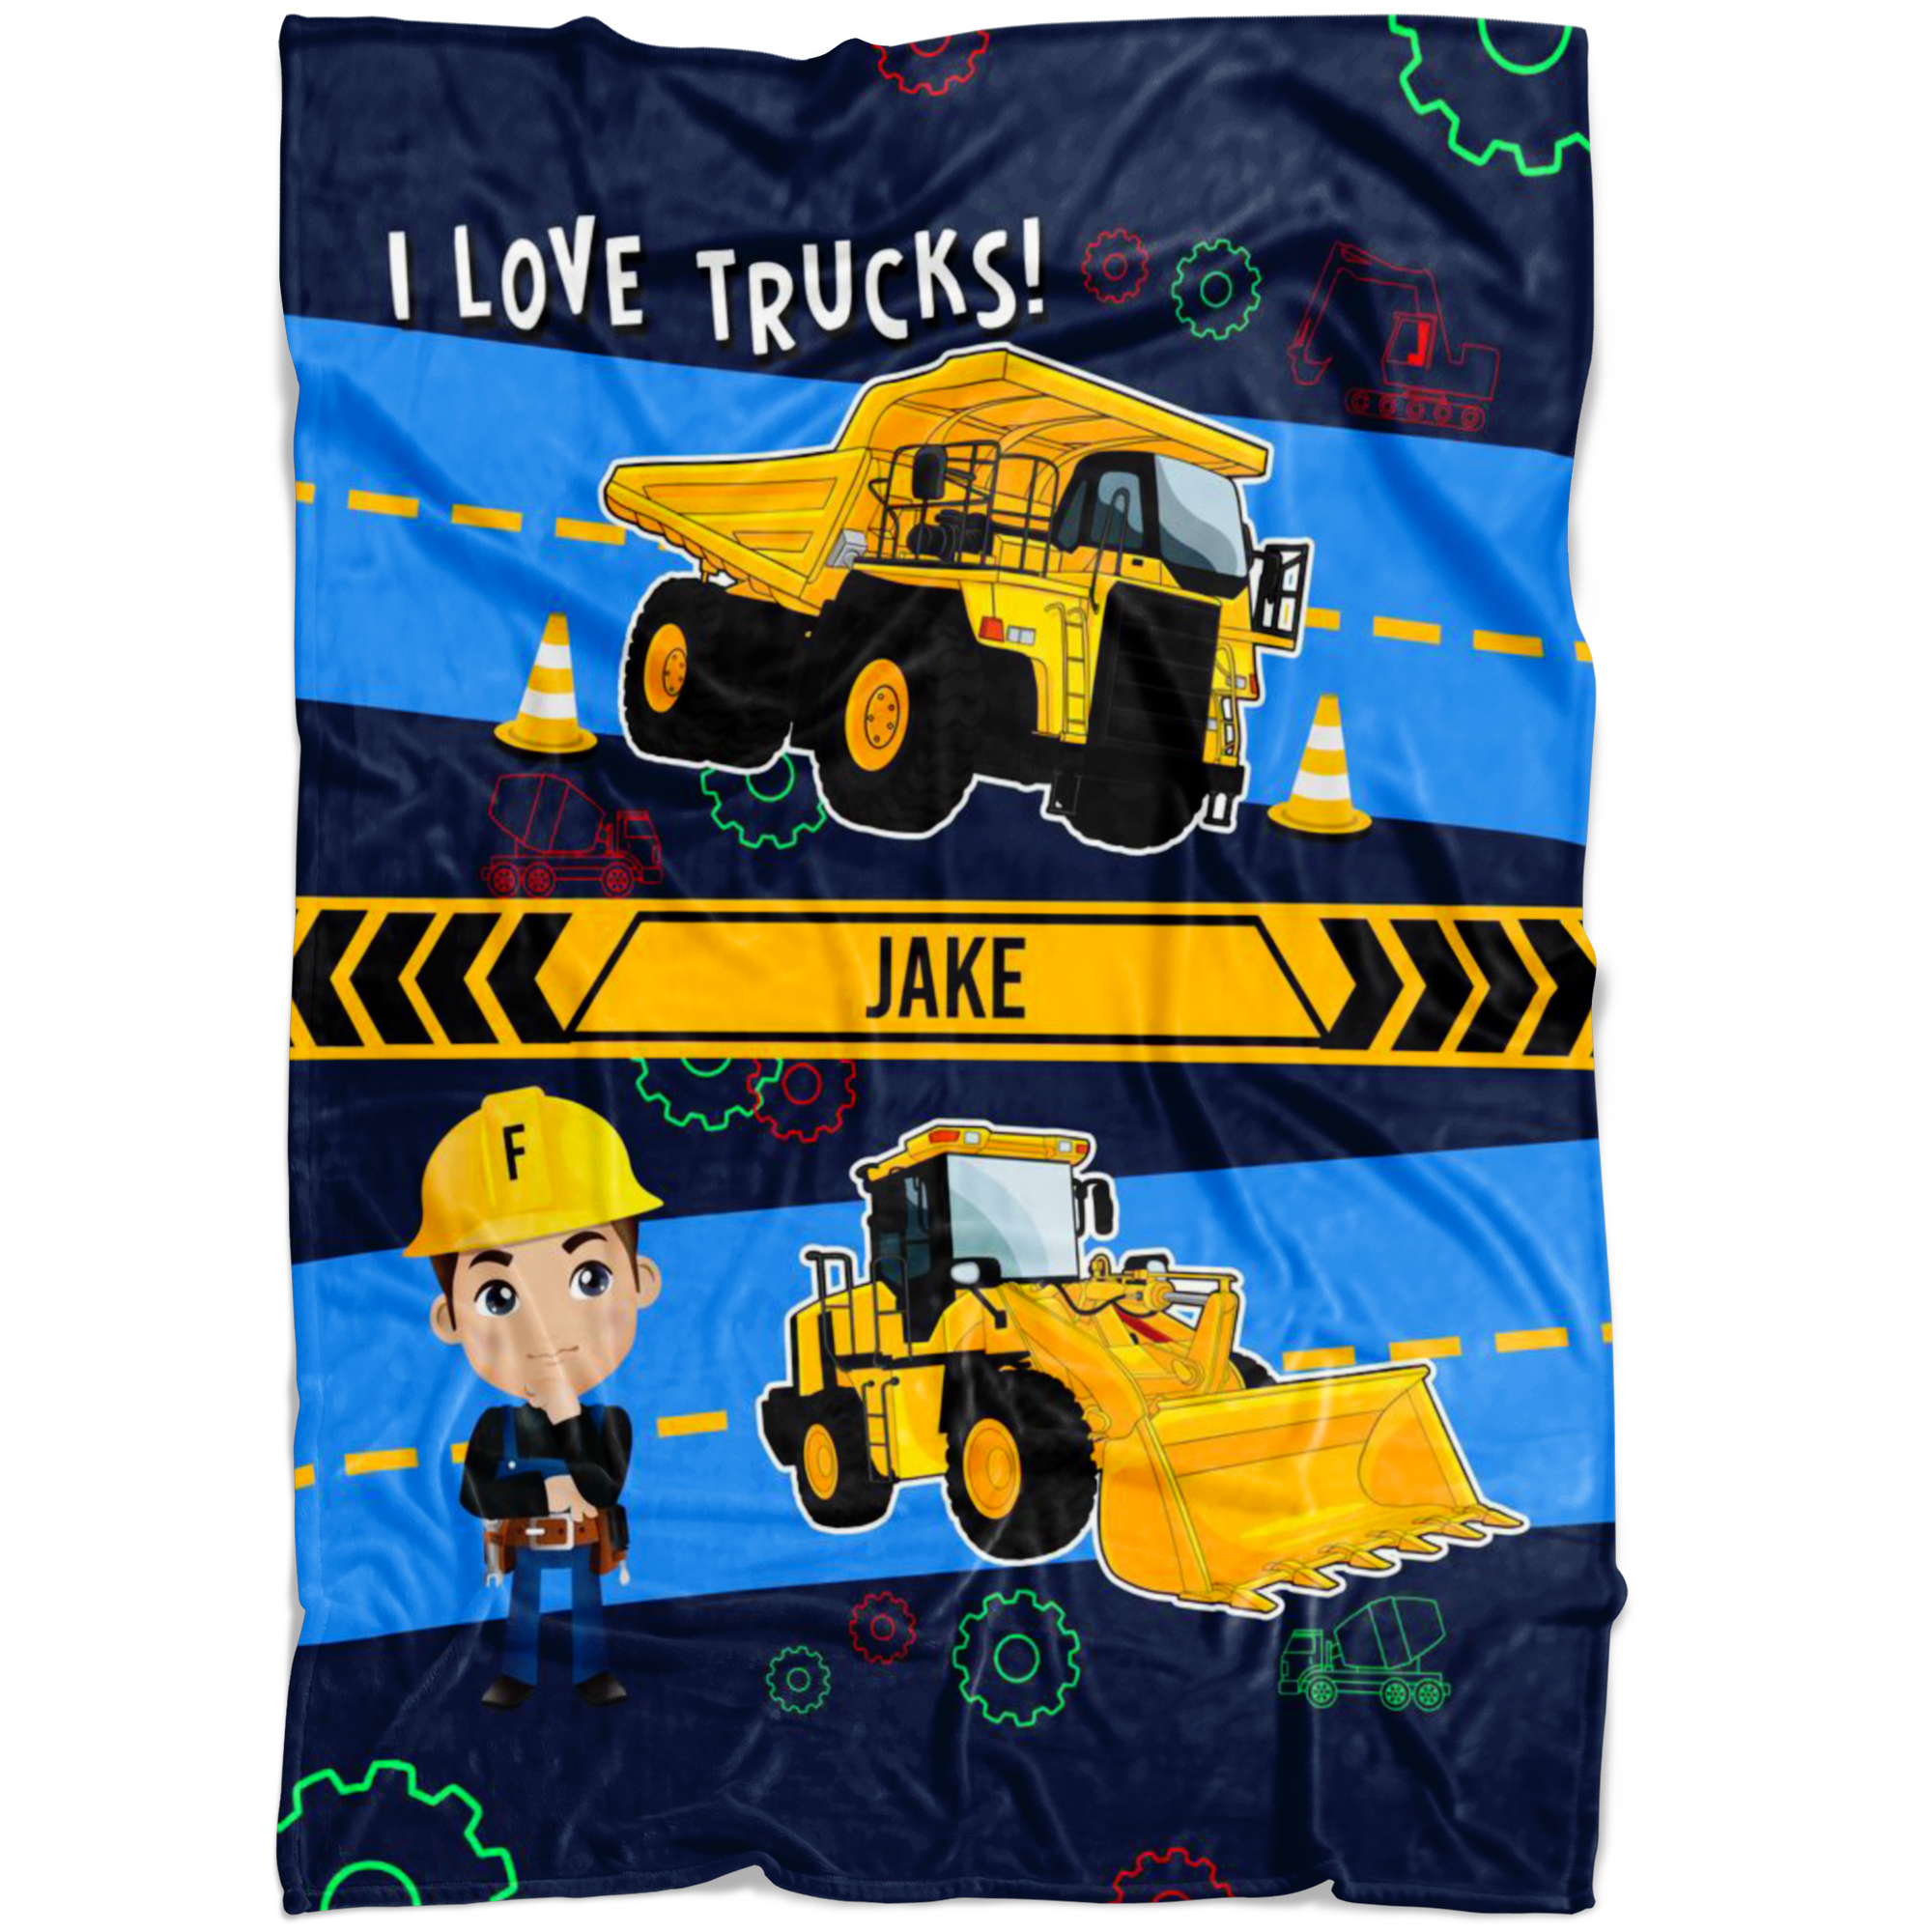 Personalized Name I Love Trucks Blanket for Boys & Girls with Character Personalization - Jake